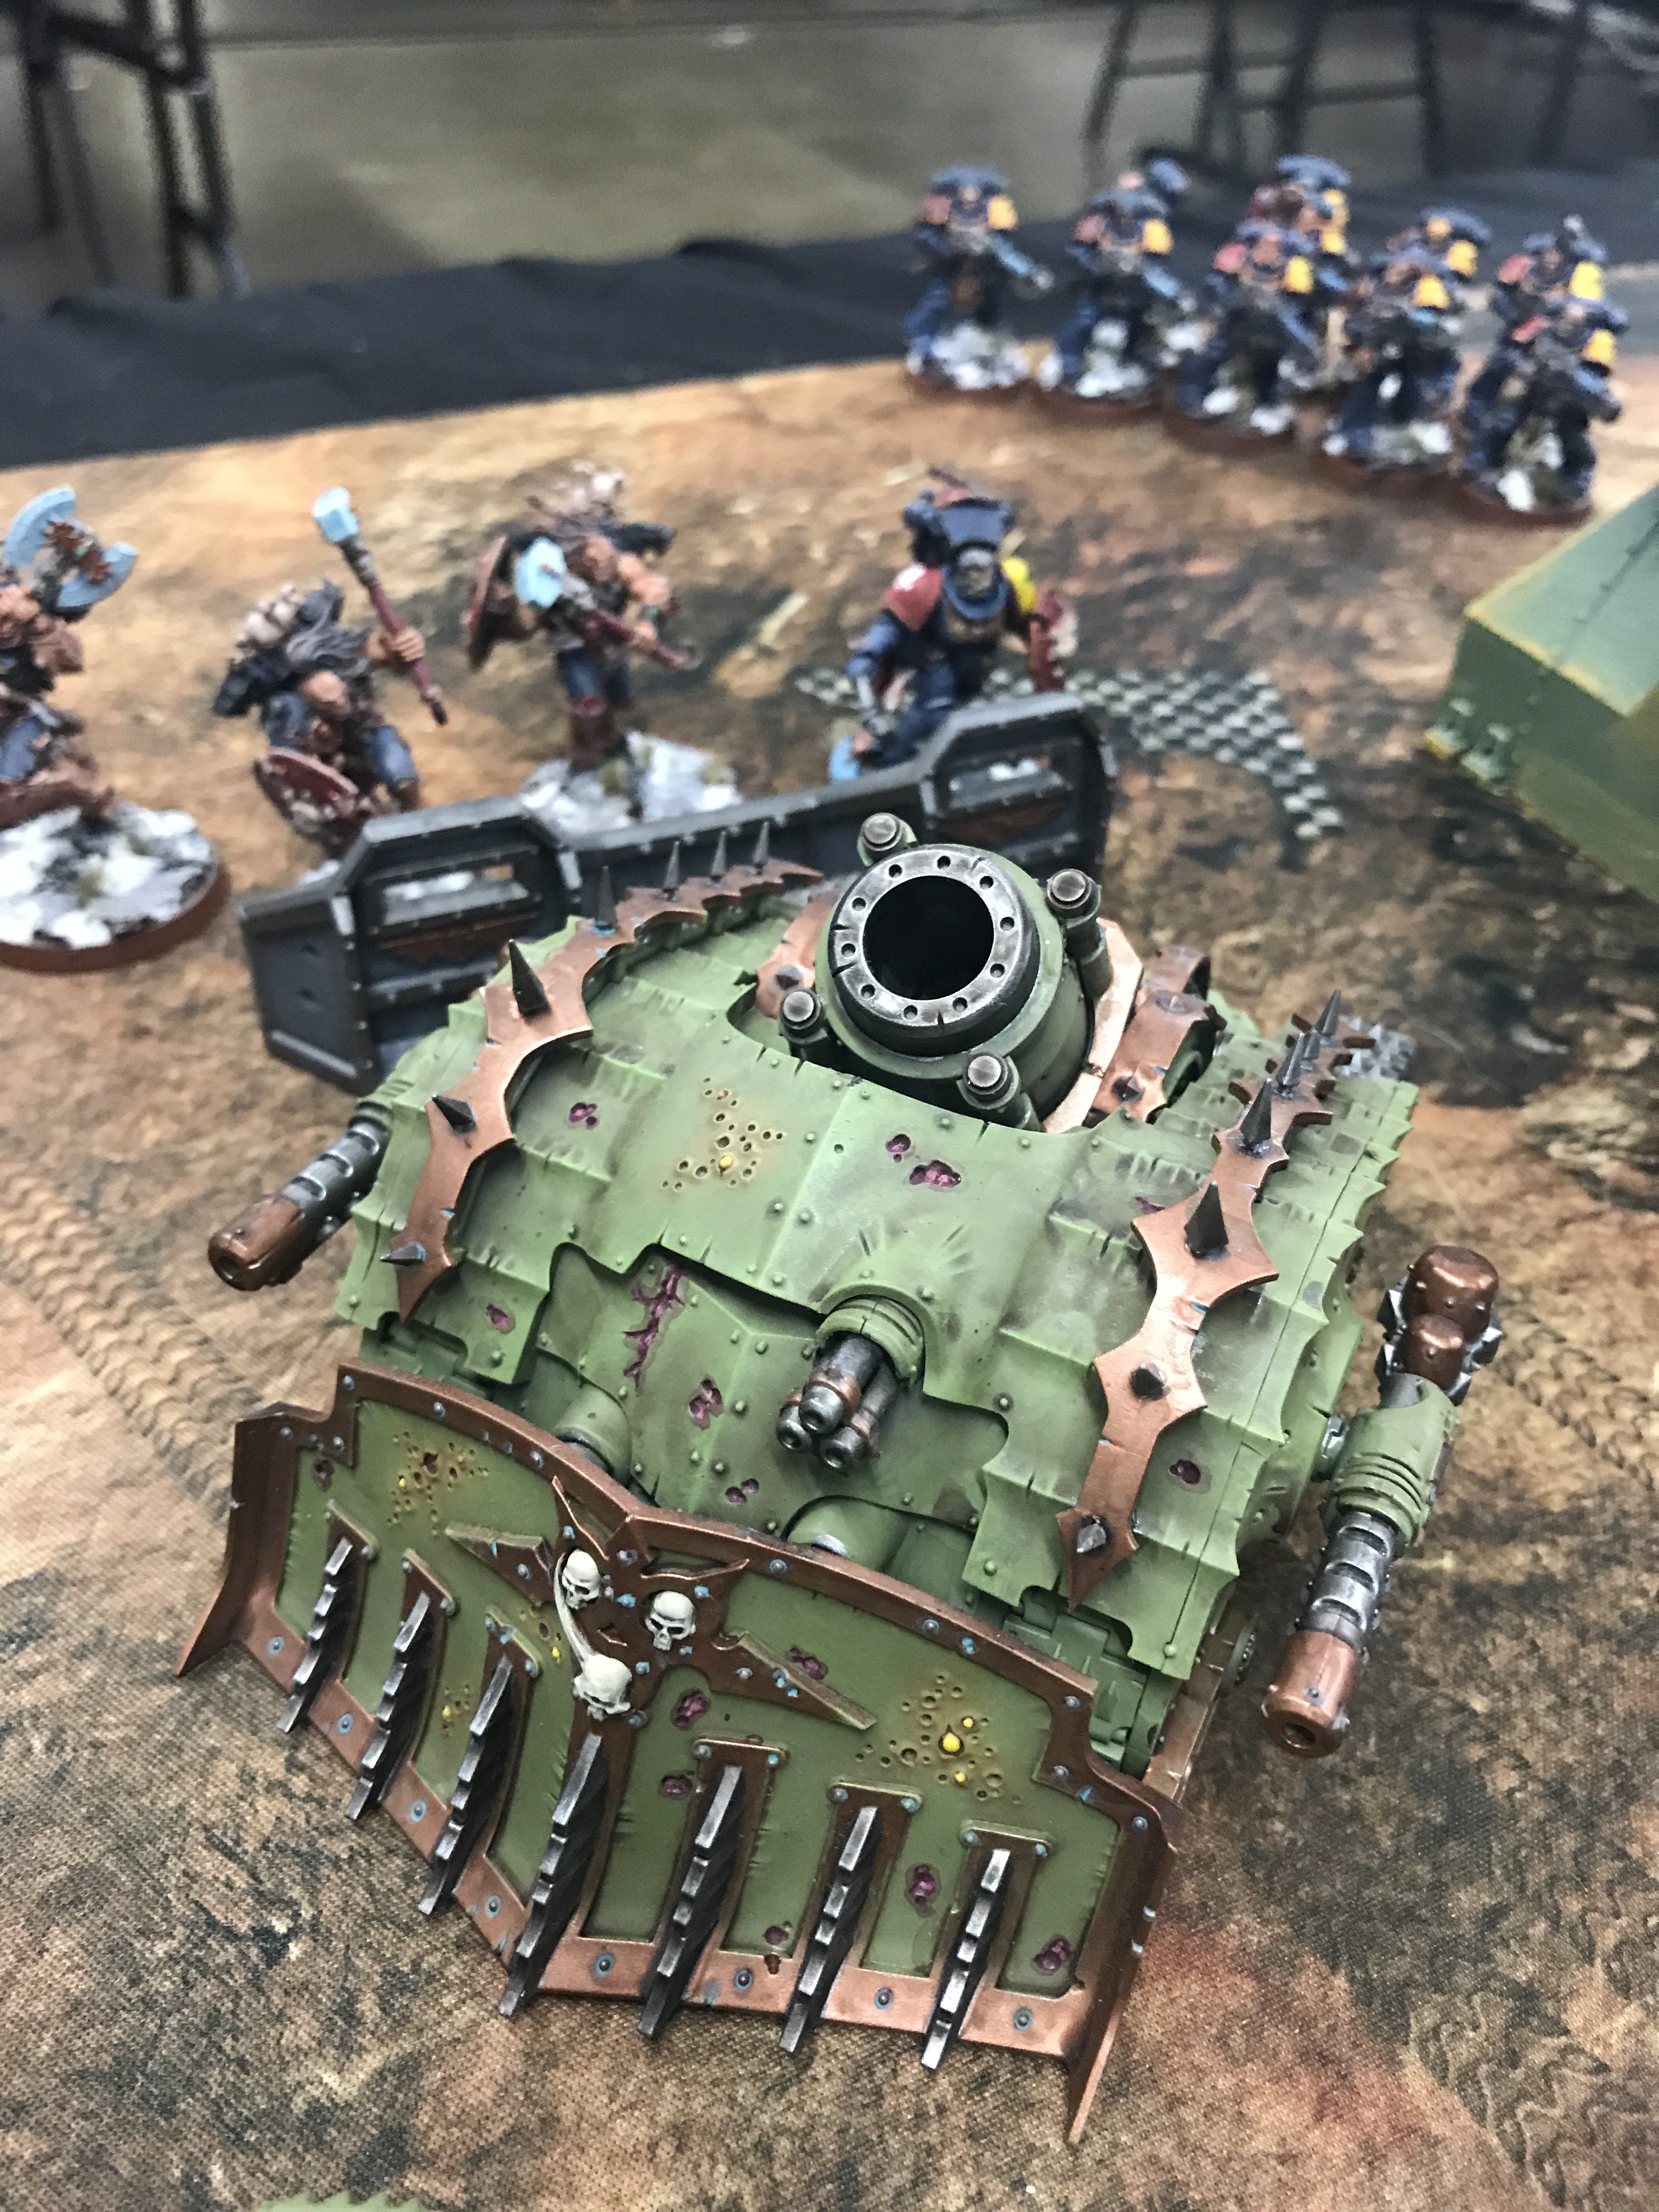 Warhammer 40K: Death Guard – Council of The Death Lord – Dragon's